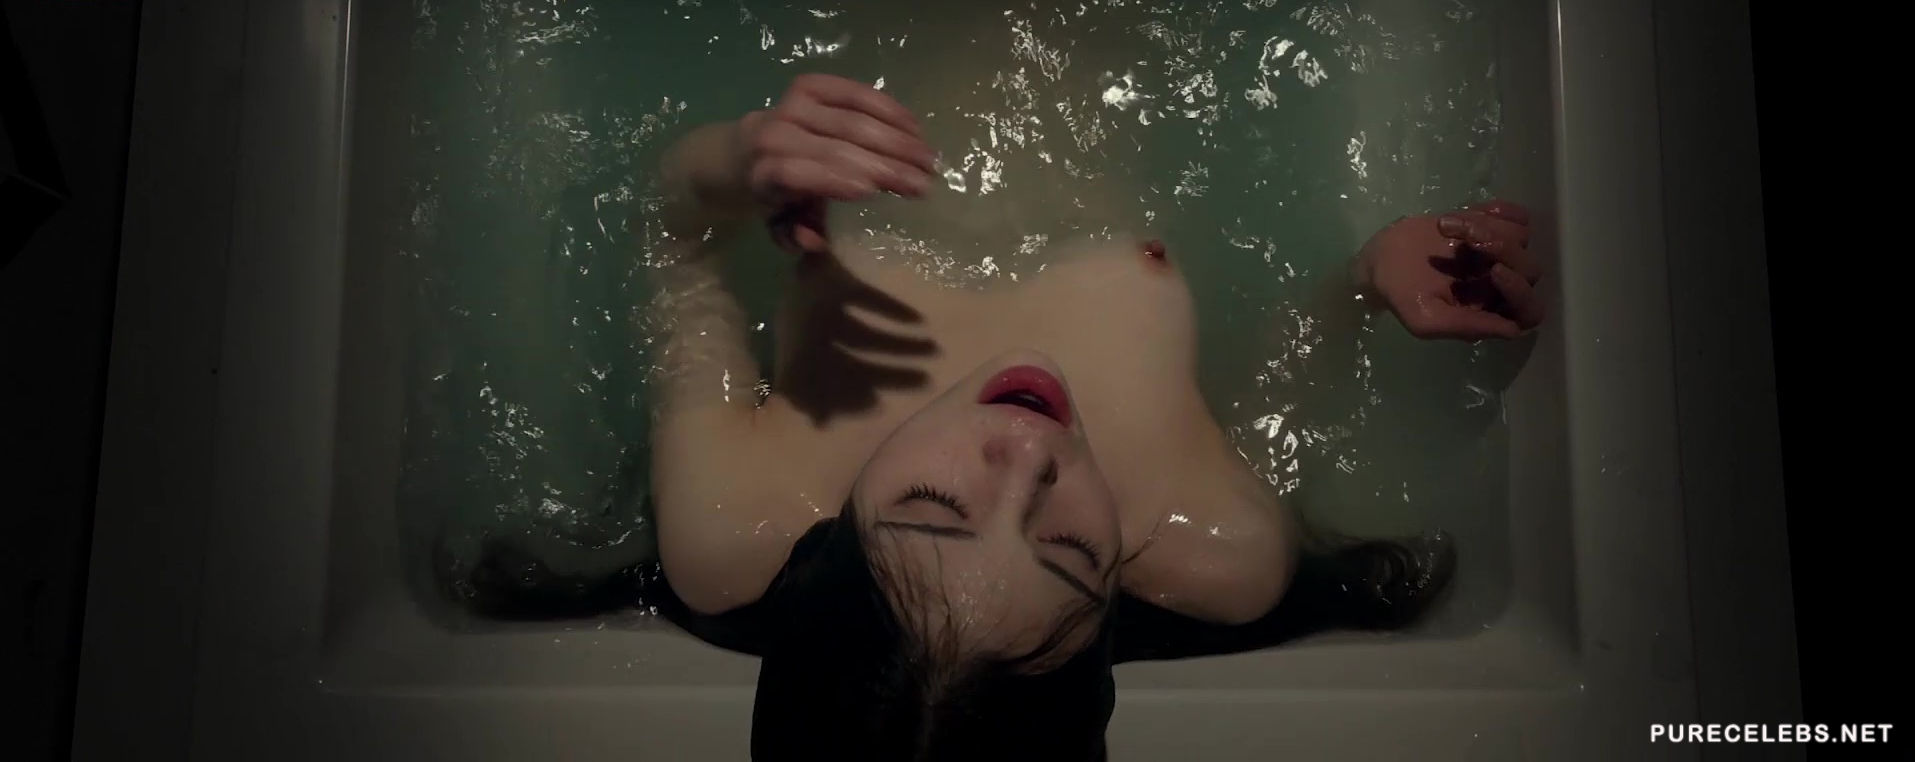 "Look Away" starring India Eisley in some seriously kinky scenes ...